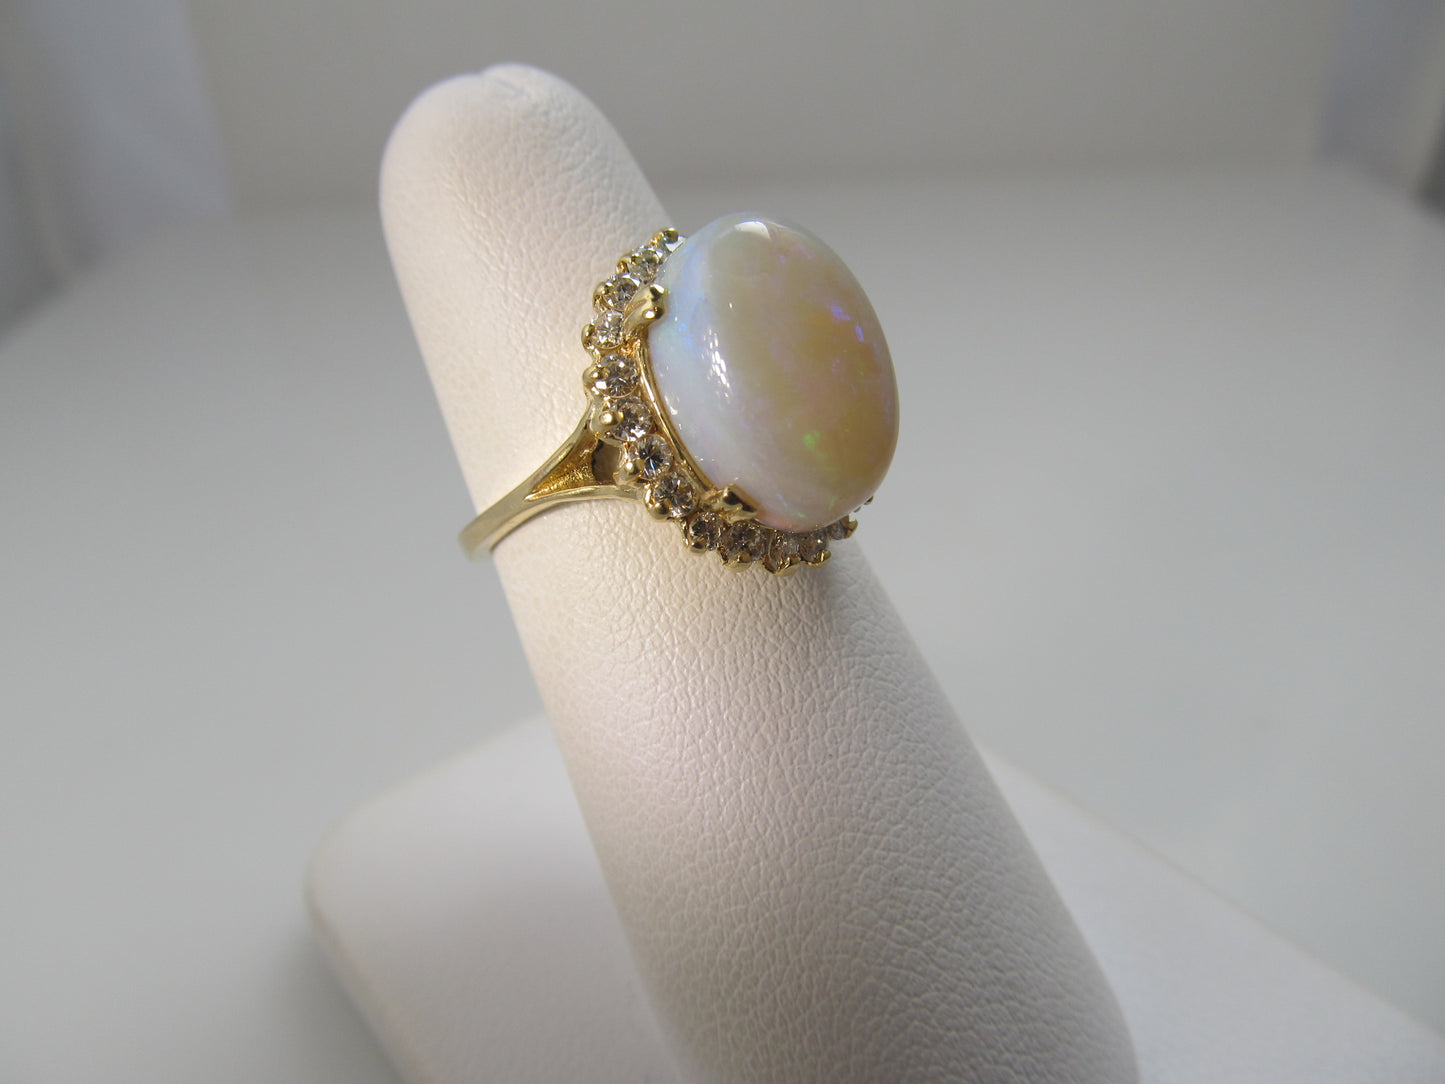 4ct natural opal ring with diamonds